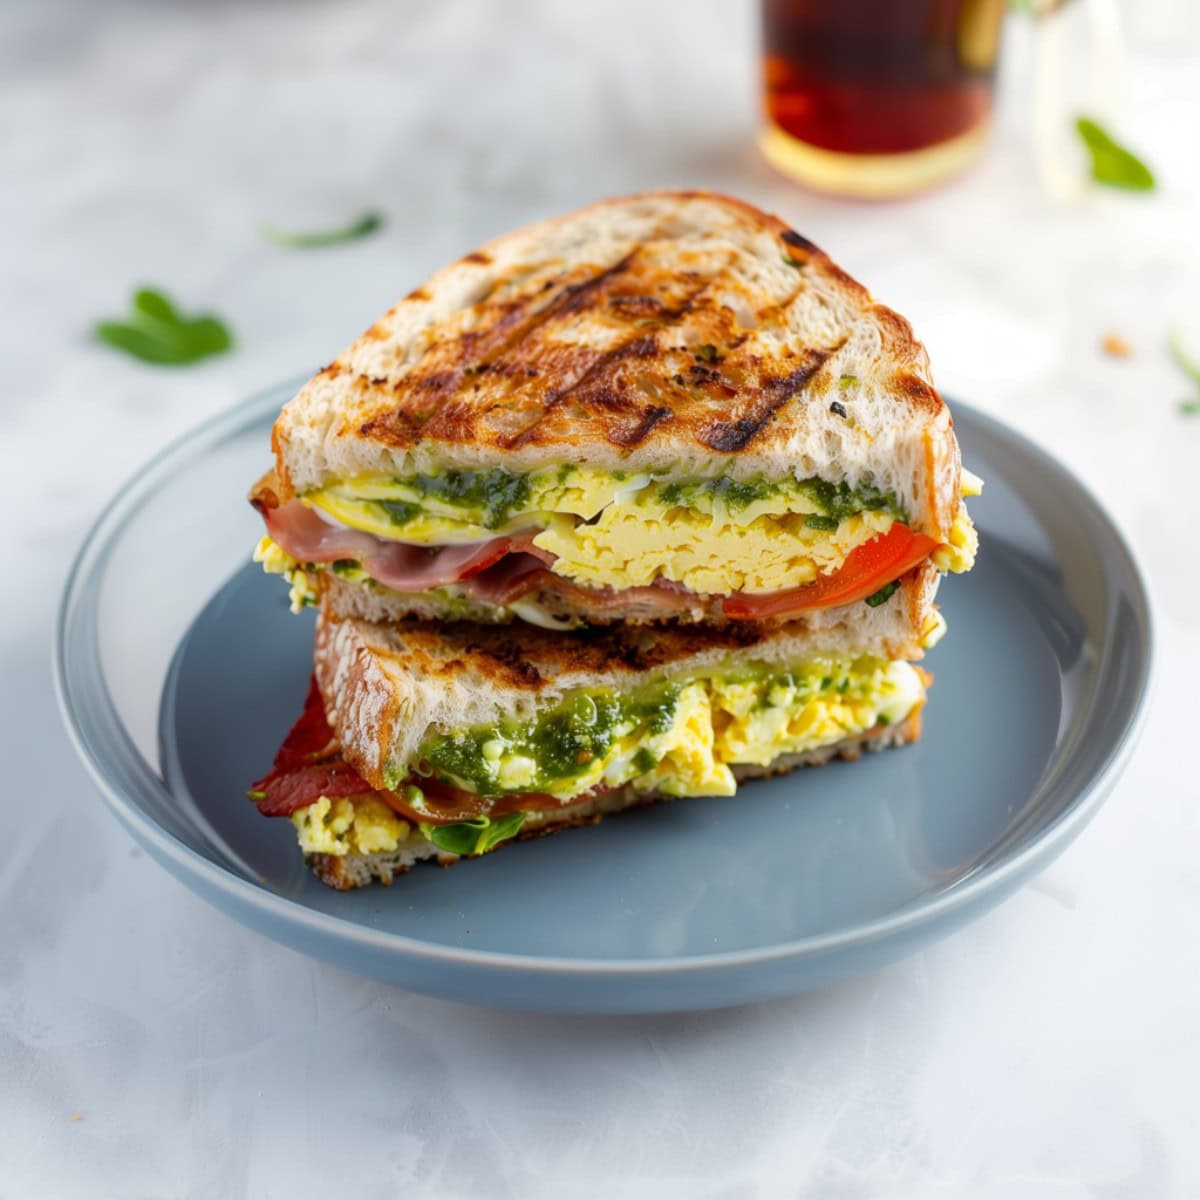 Warm Breakfast Panini Filled With Eggs, Tomatoes, Crispy Bacon and Spinach.